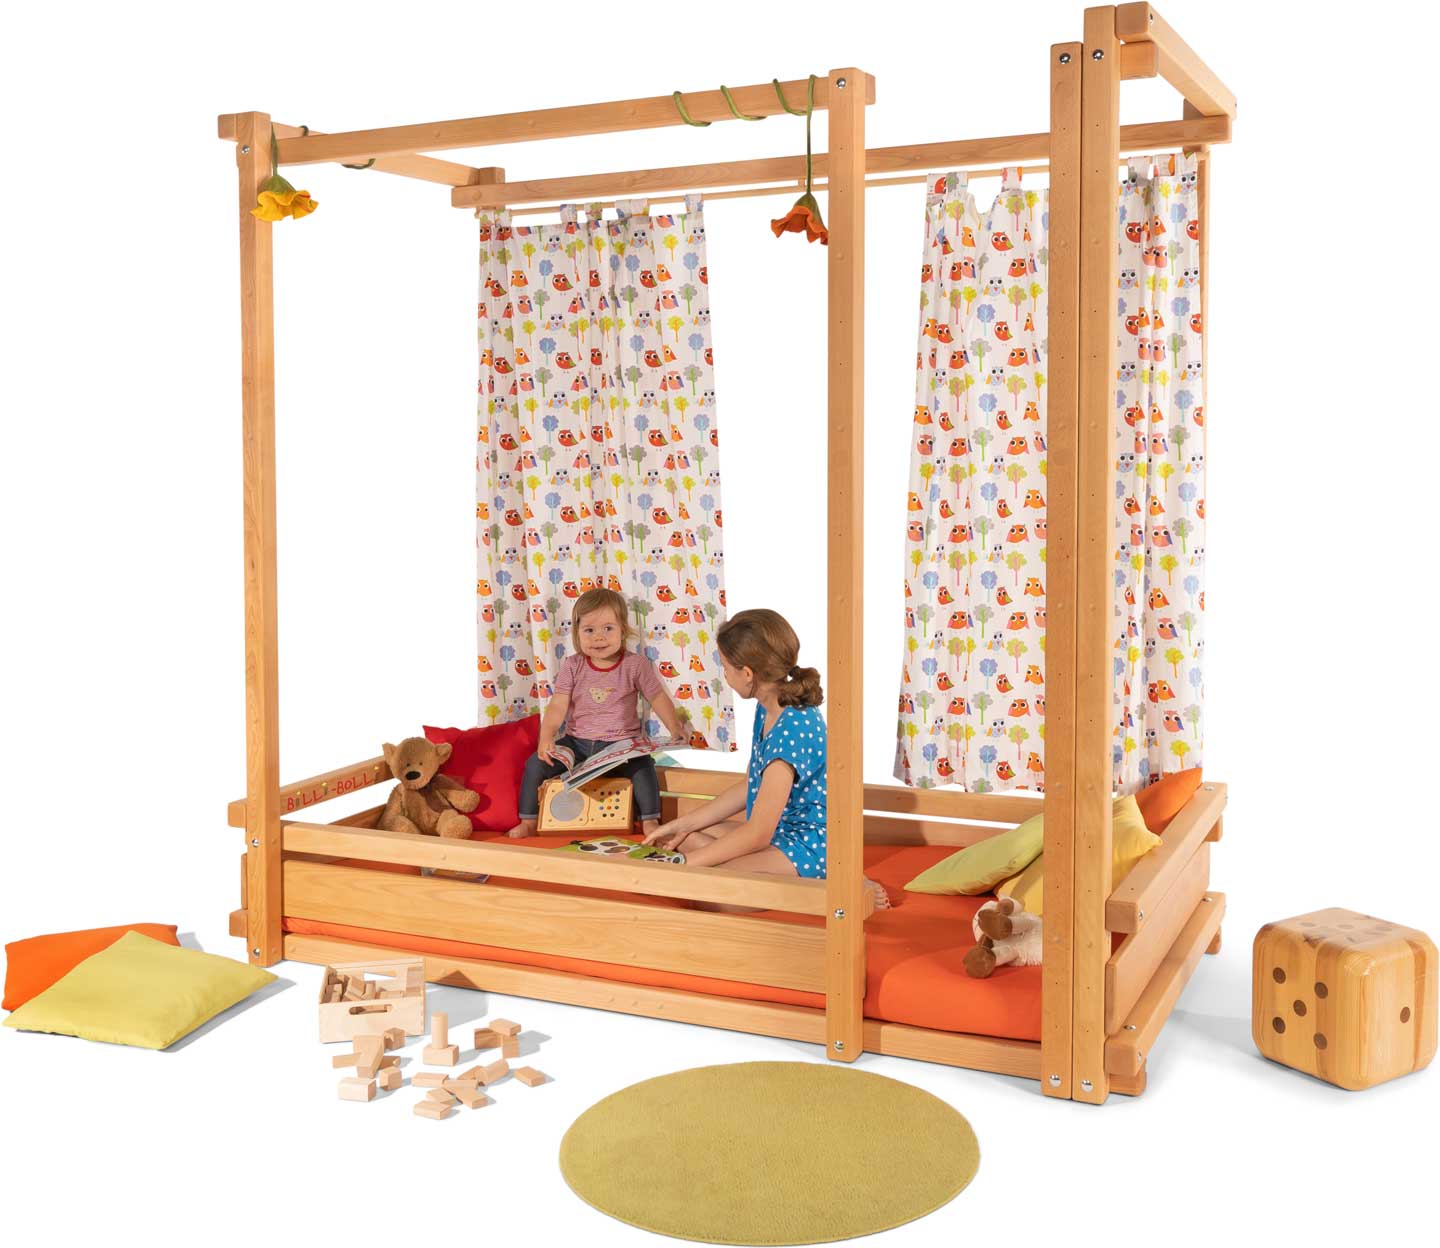 The Loft Bed Adjustable by Age in beech, assembled at height&nbsp;1. Pictured with Curtain Rods and mattress Nele Plus.